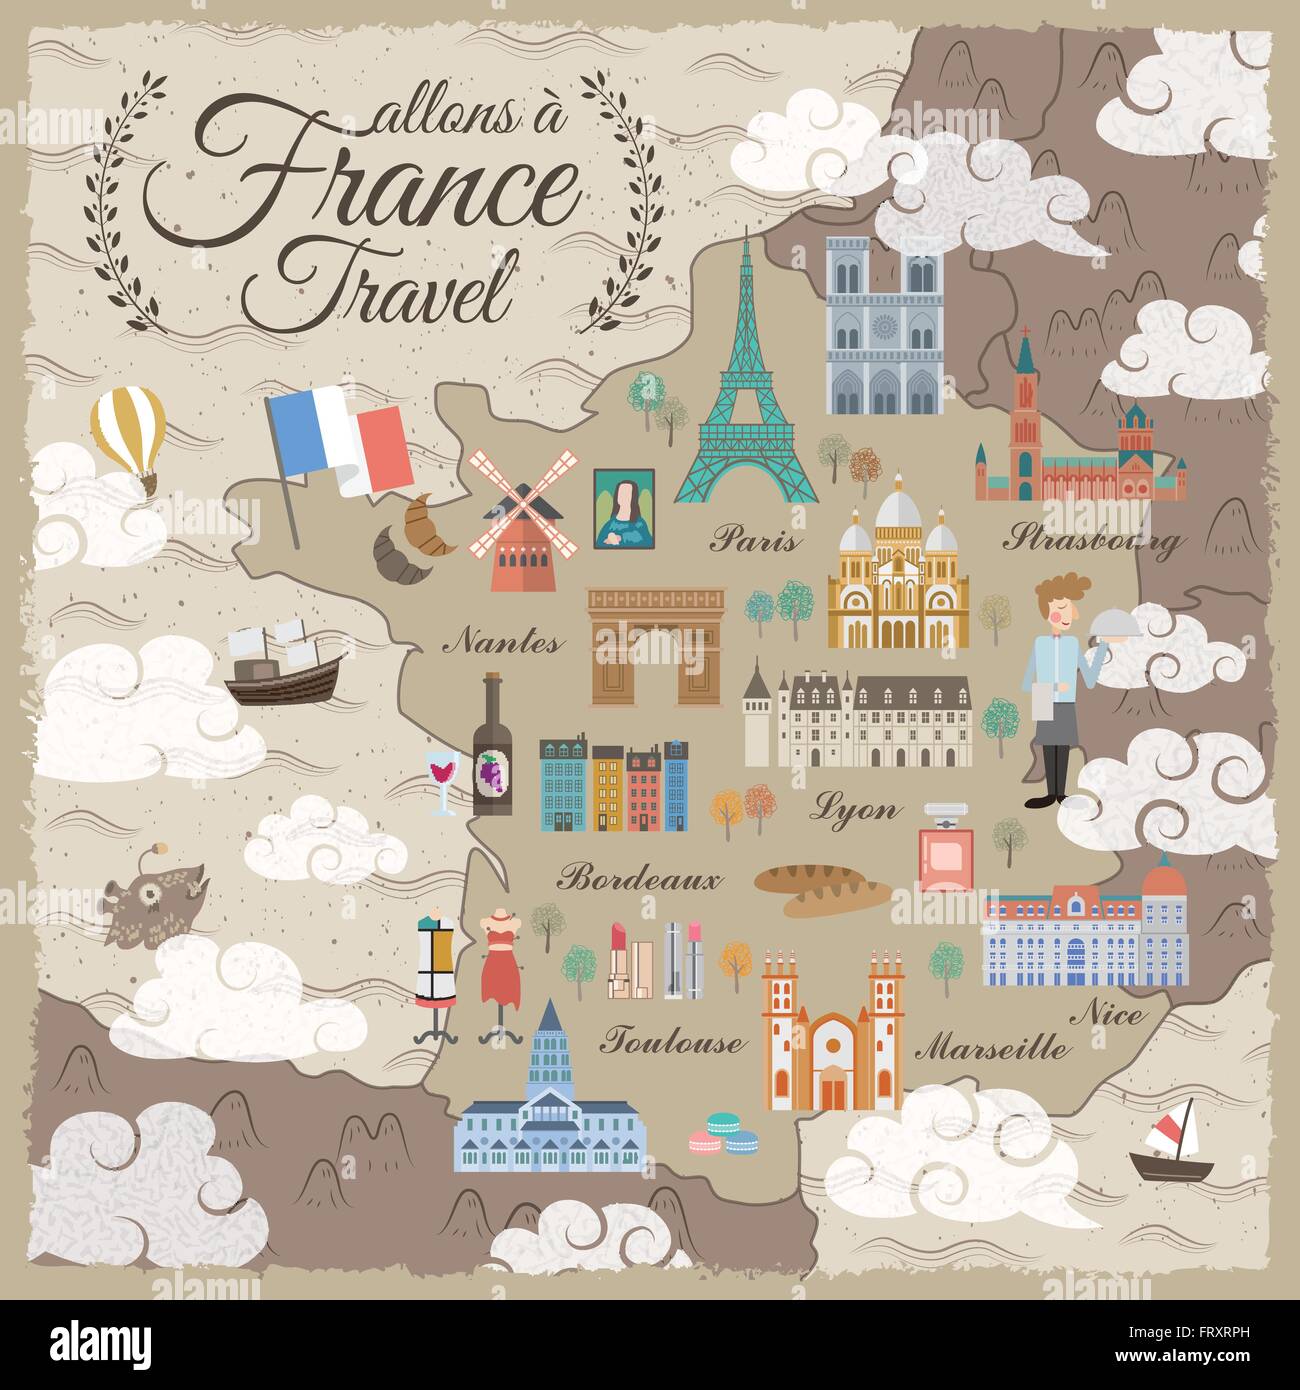 attractive France travel map with attractions and specialties Stock Vector